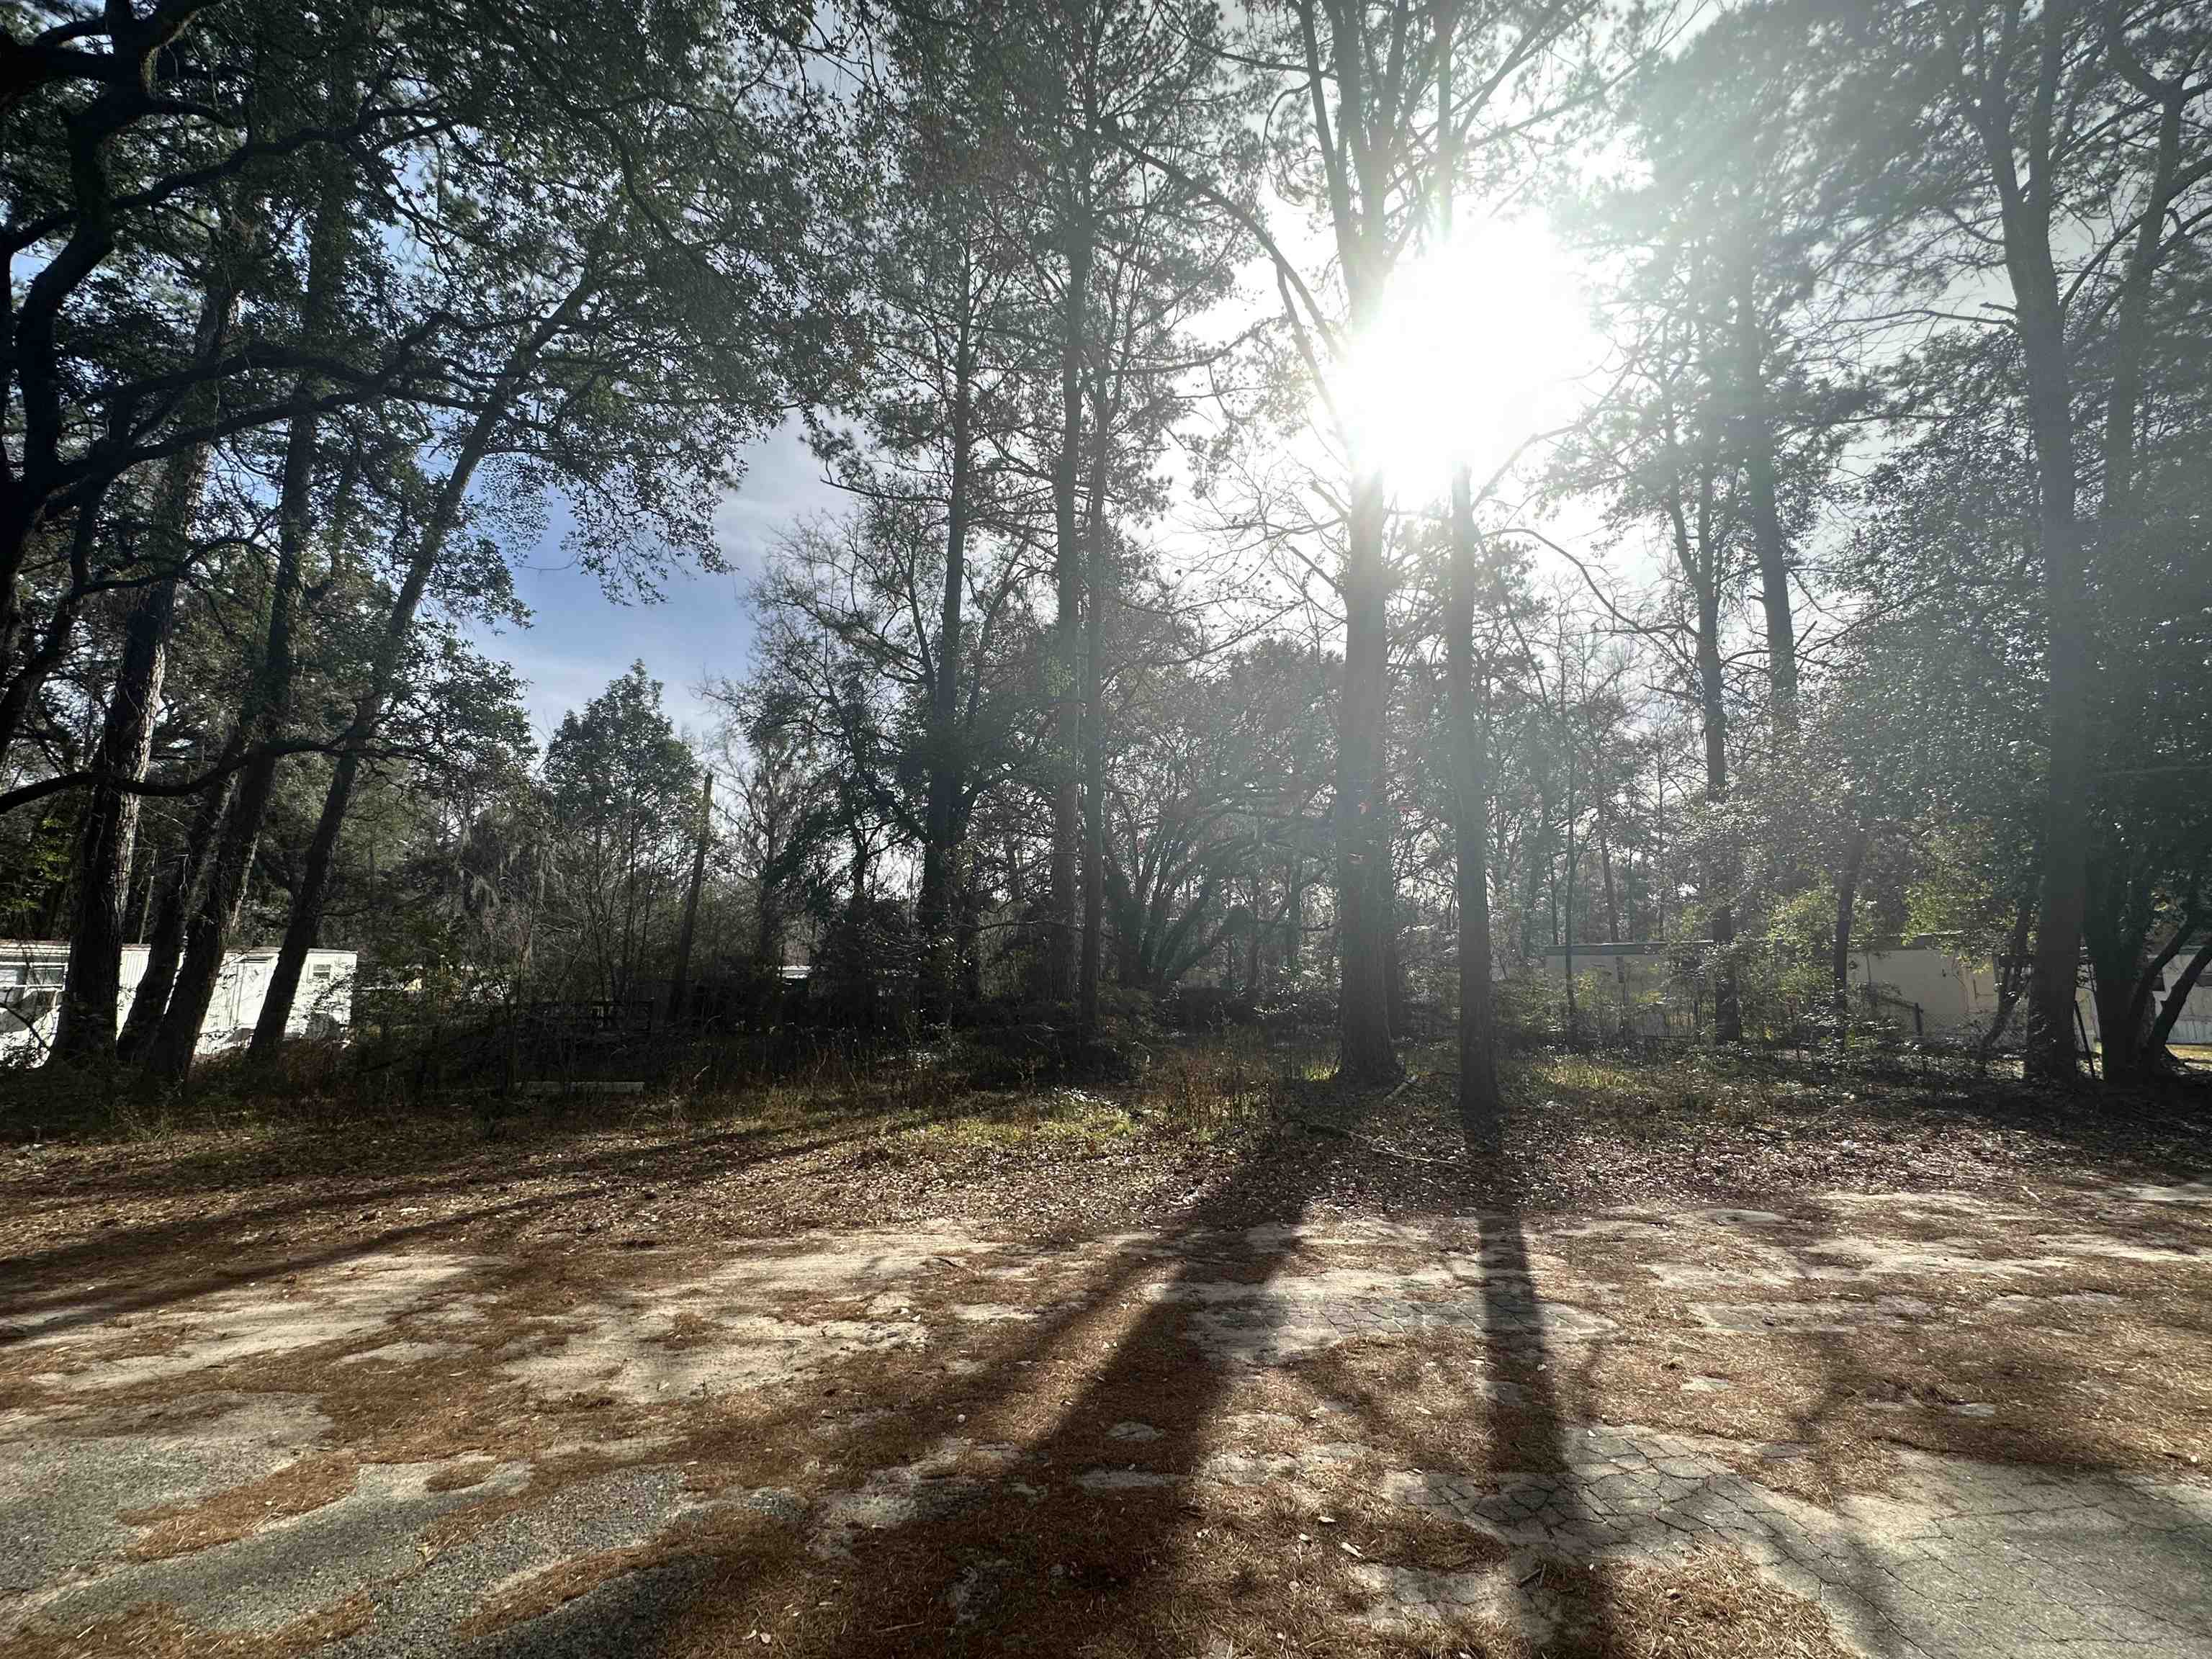 4321 Conifer,TALLAHASSEE,Florida 32304-2754,Lots and land,Conifer,368227